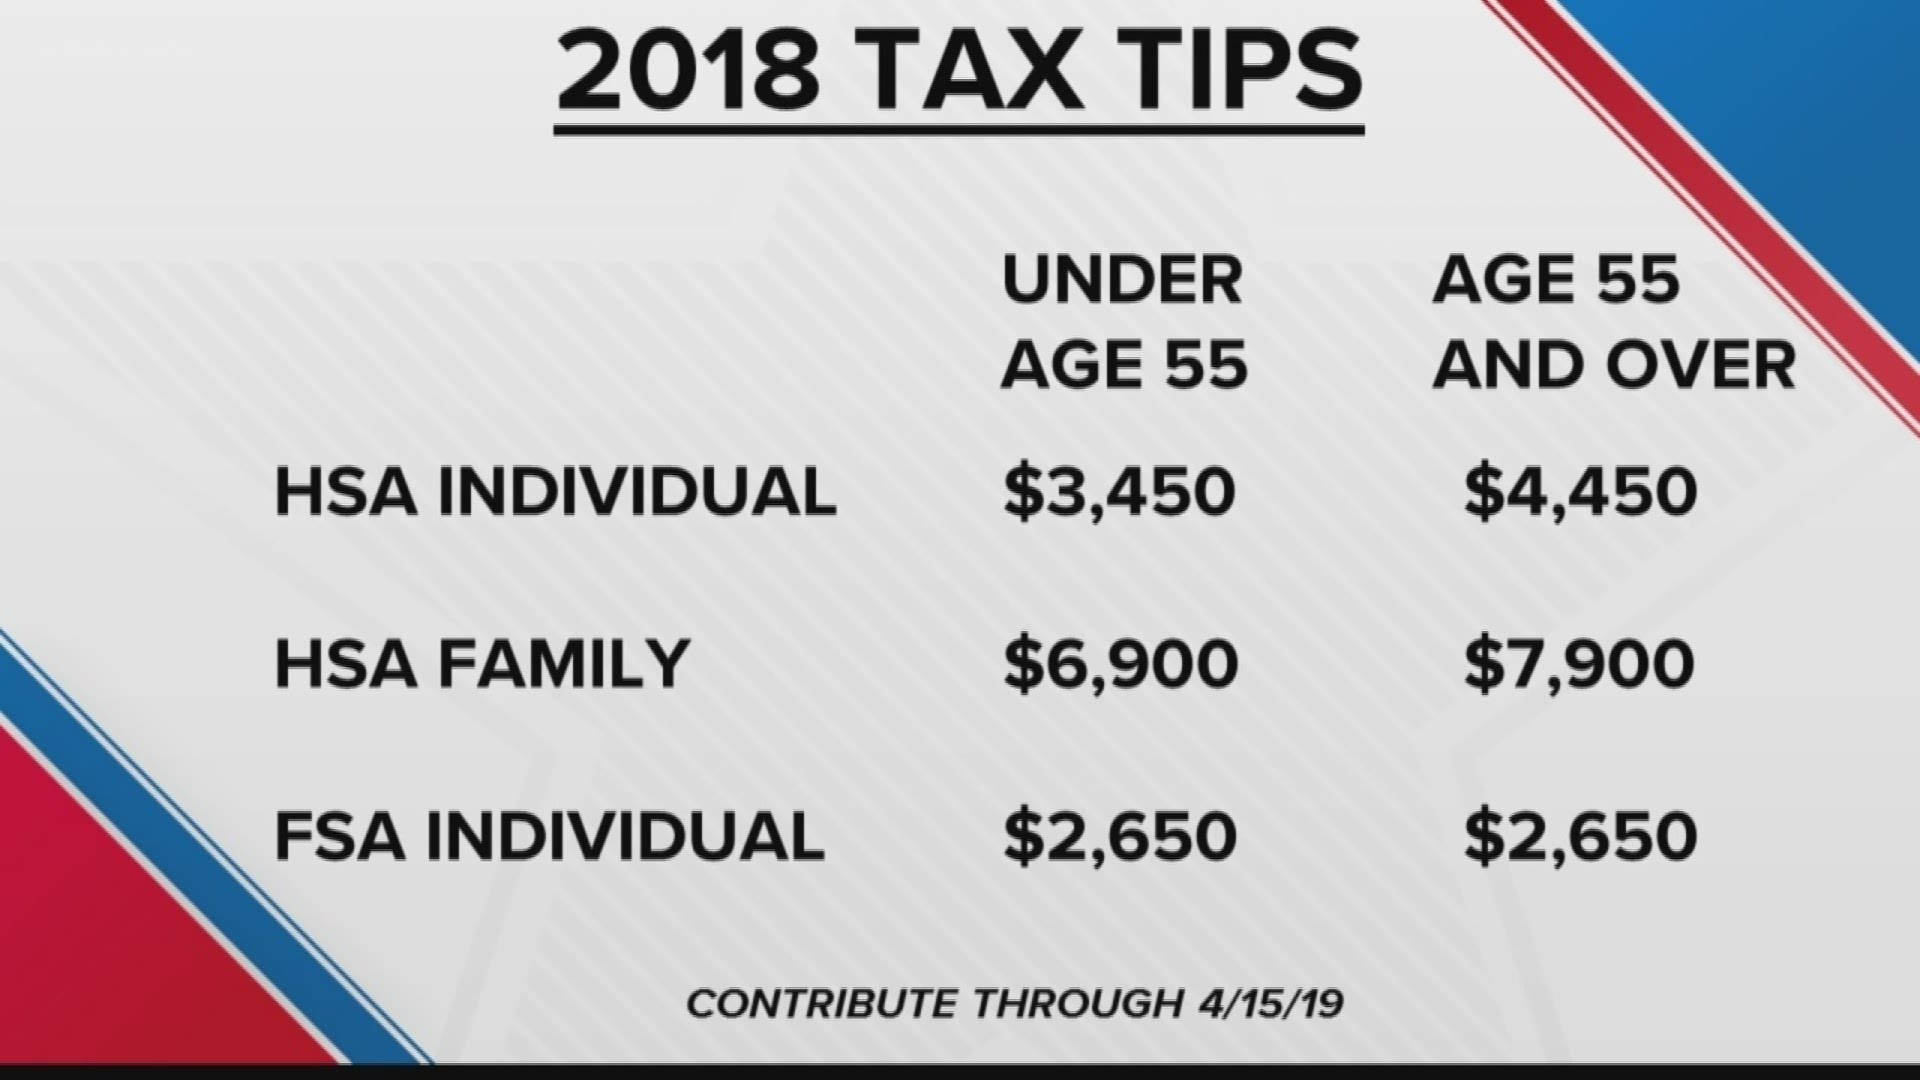 Now that all that gift buying is over, it's time to refill that bank account -- why not take advantage of these tax tips?